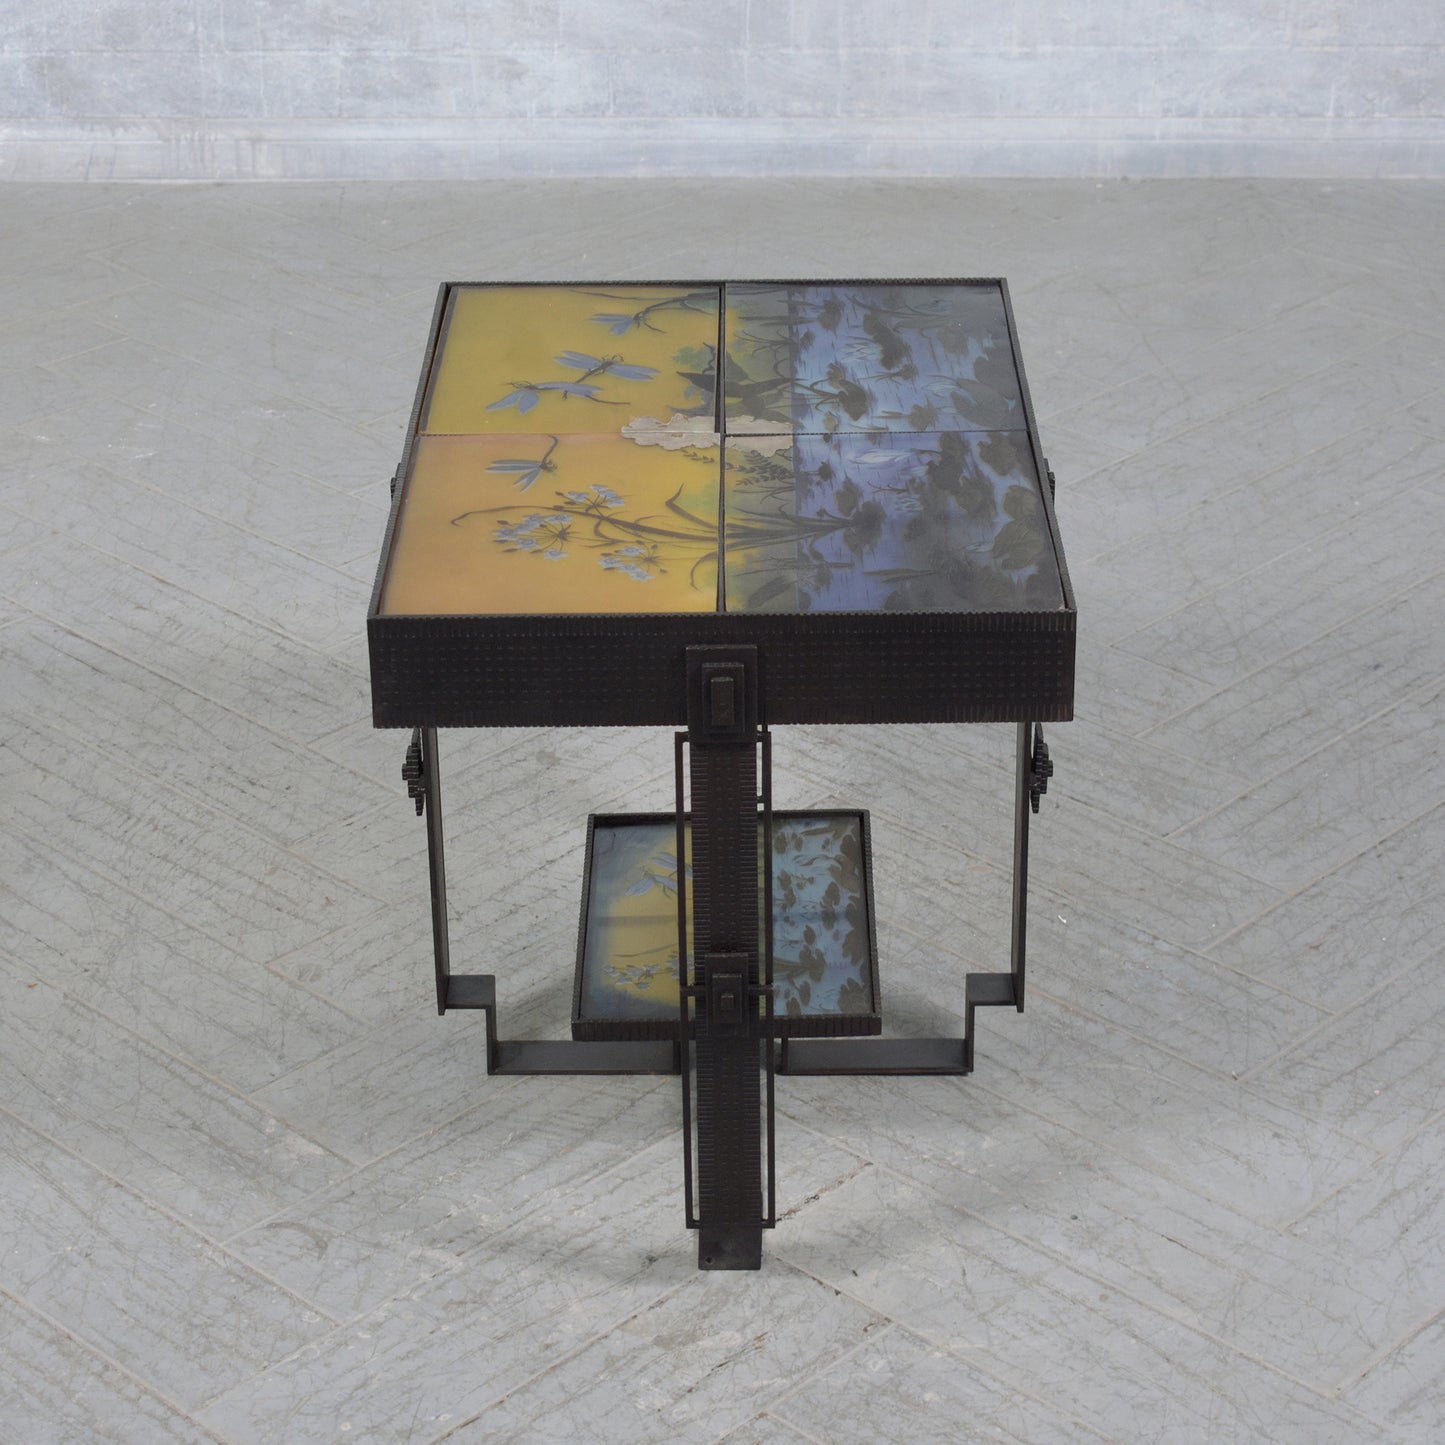 1970s Art Deco Side Table: Vintage Iron & Glass with Intricate Nature Scenes